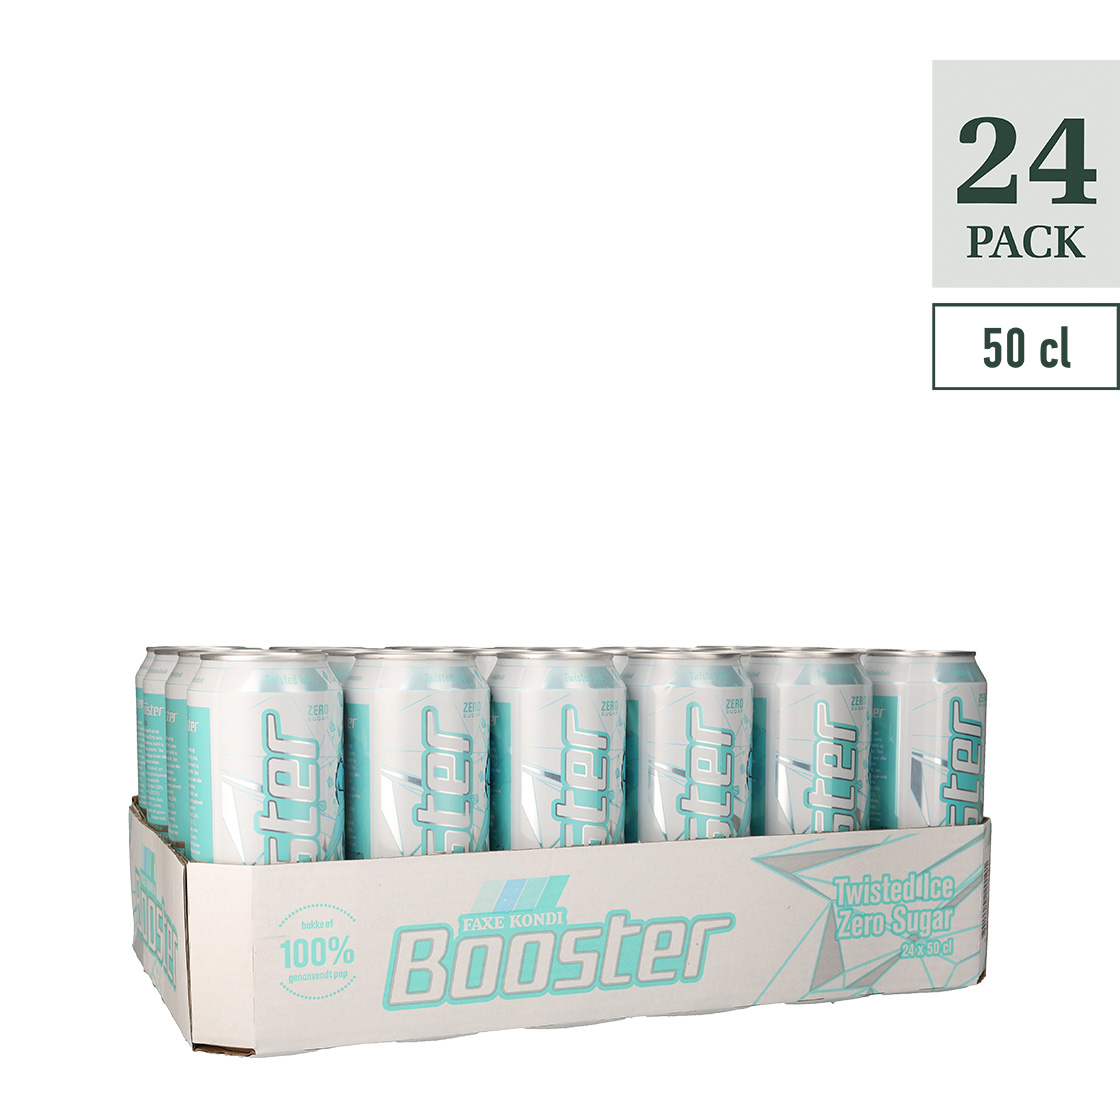 BOOSTER TWISTED ICE 50CL CAN 72/24/50